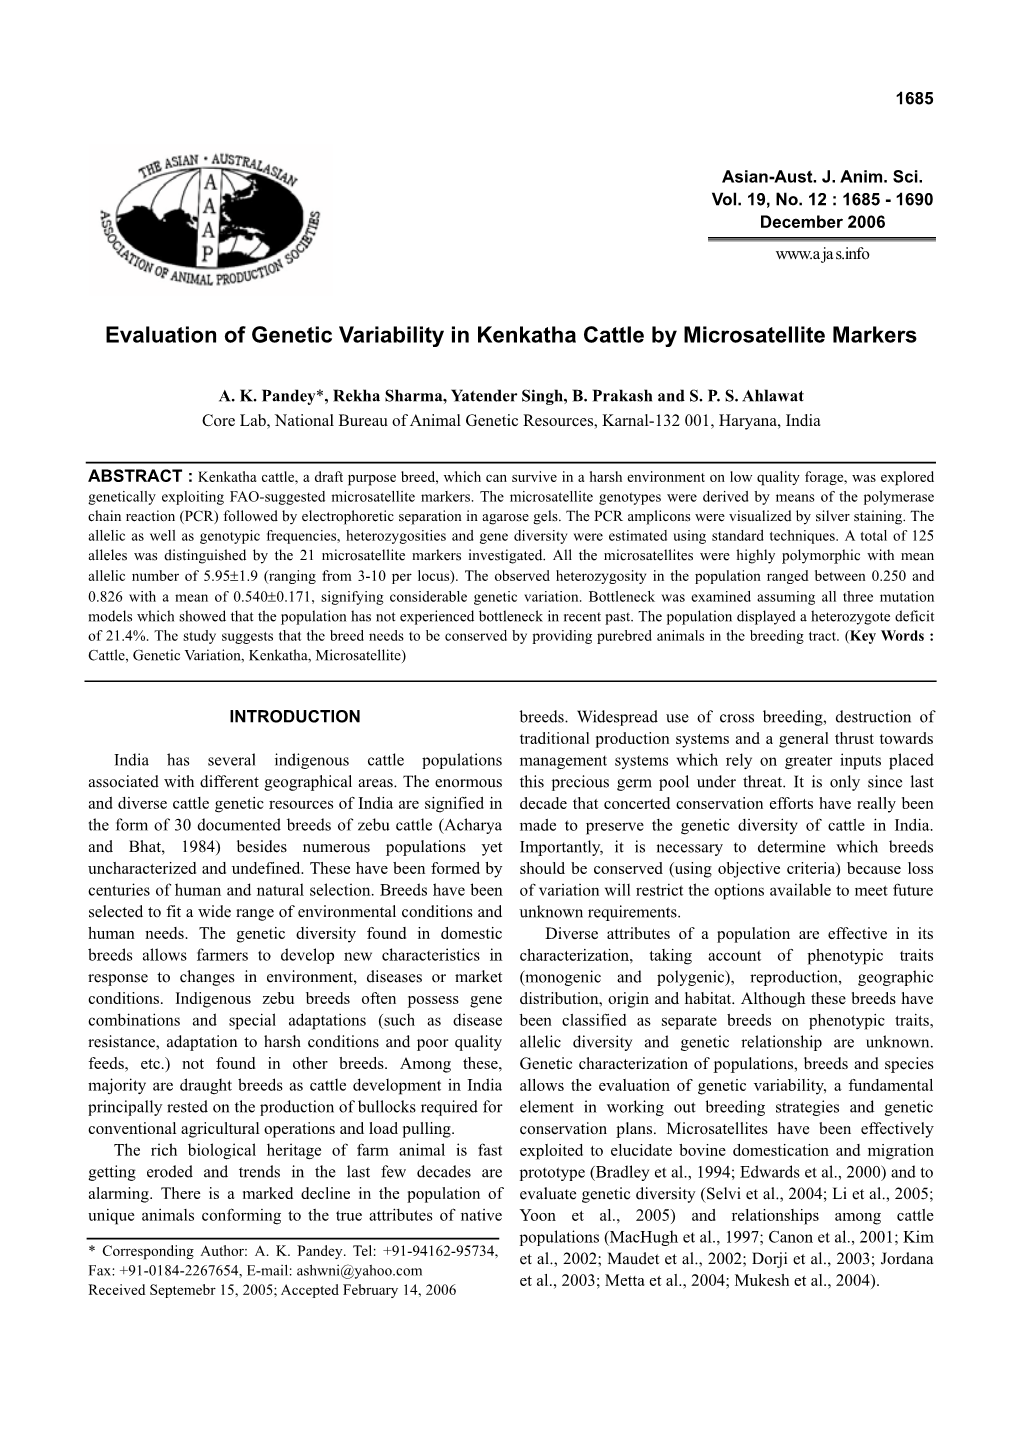 Evaluation of Genetic Variability in Kenkatha Cattle by Microsatellite Markers